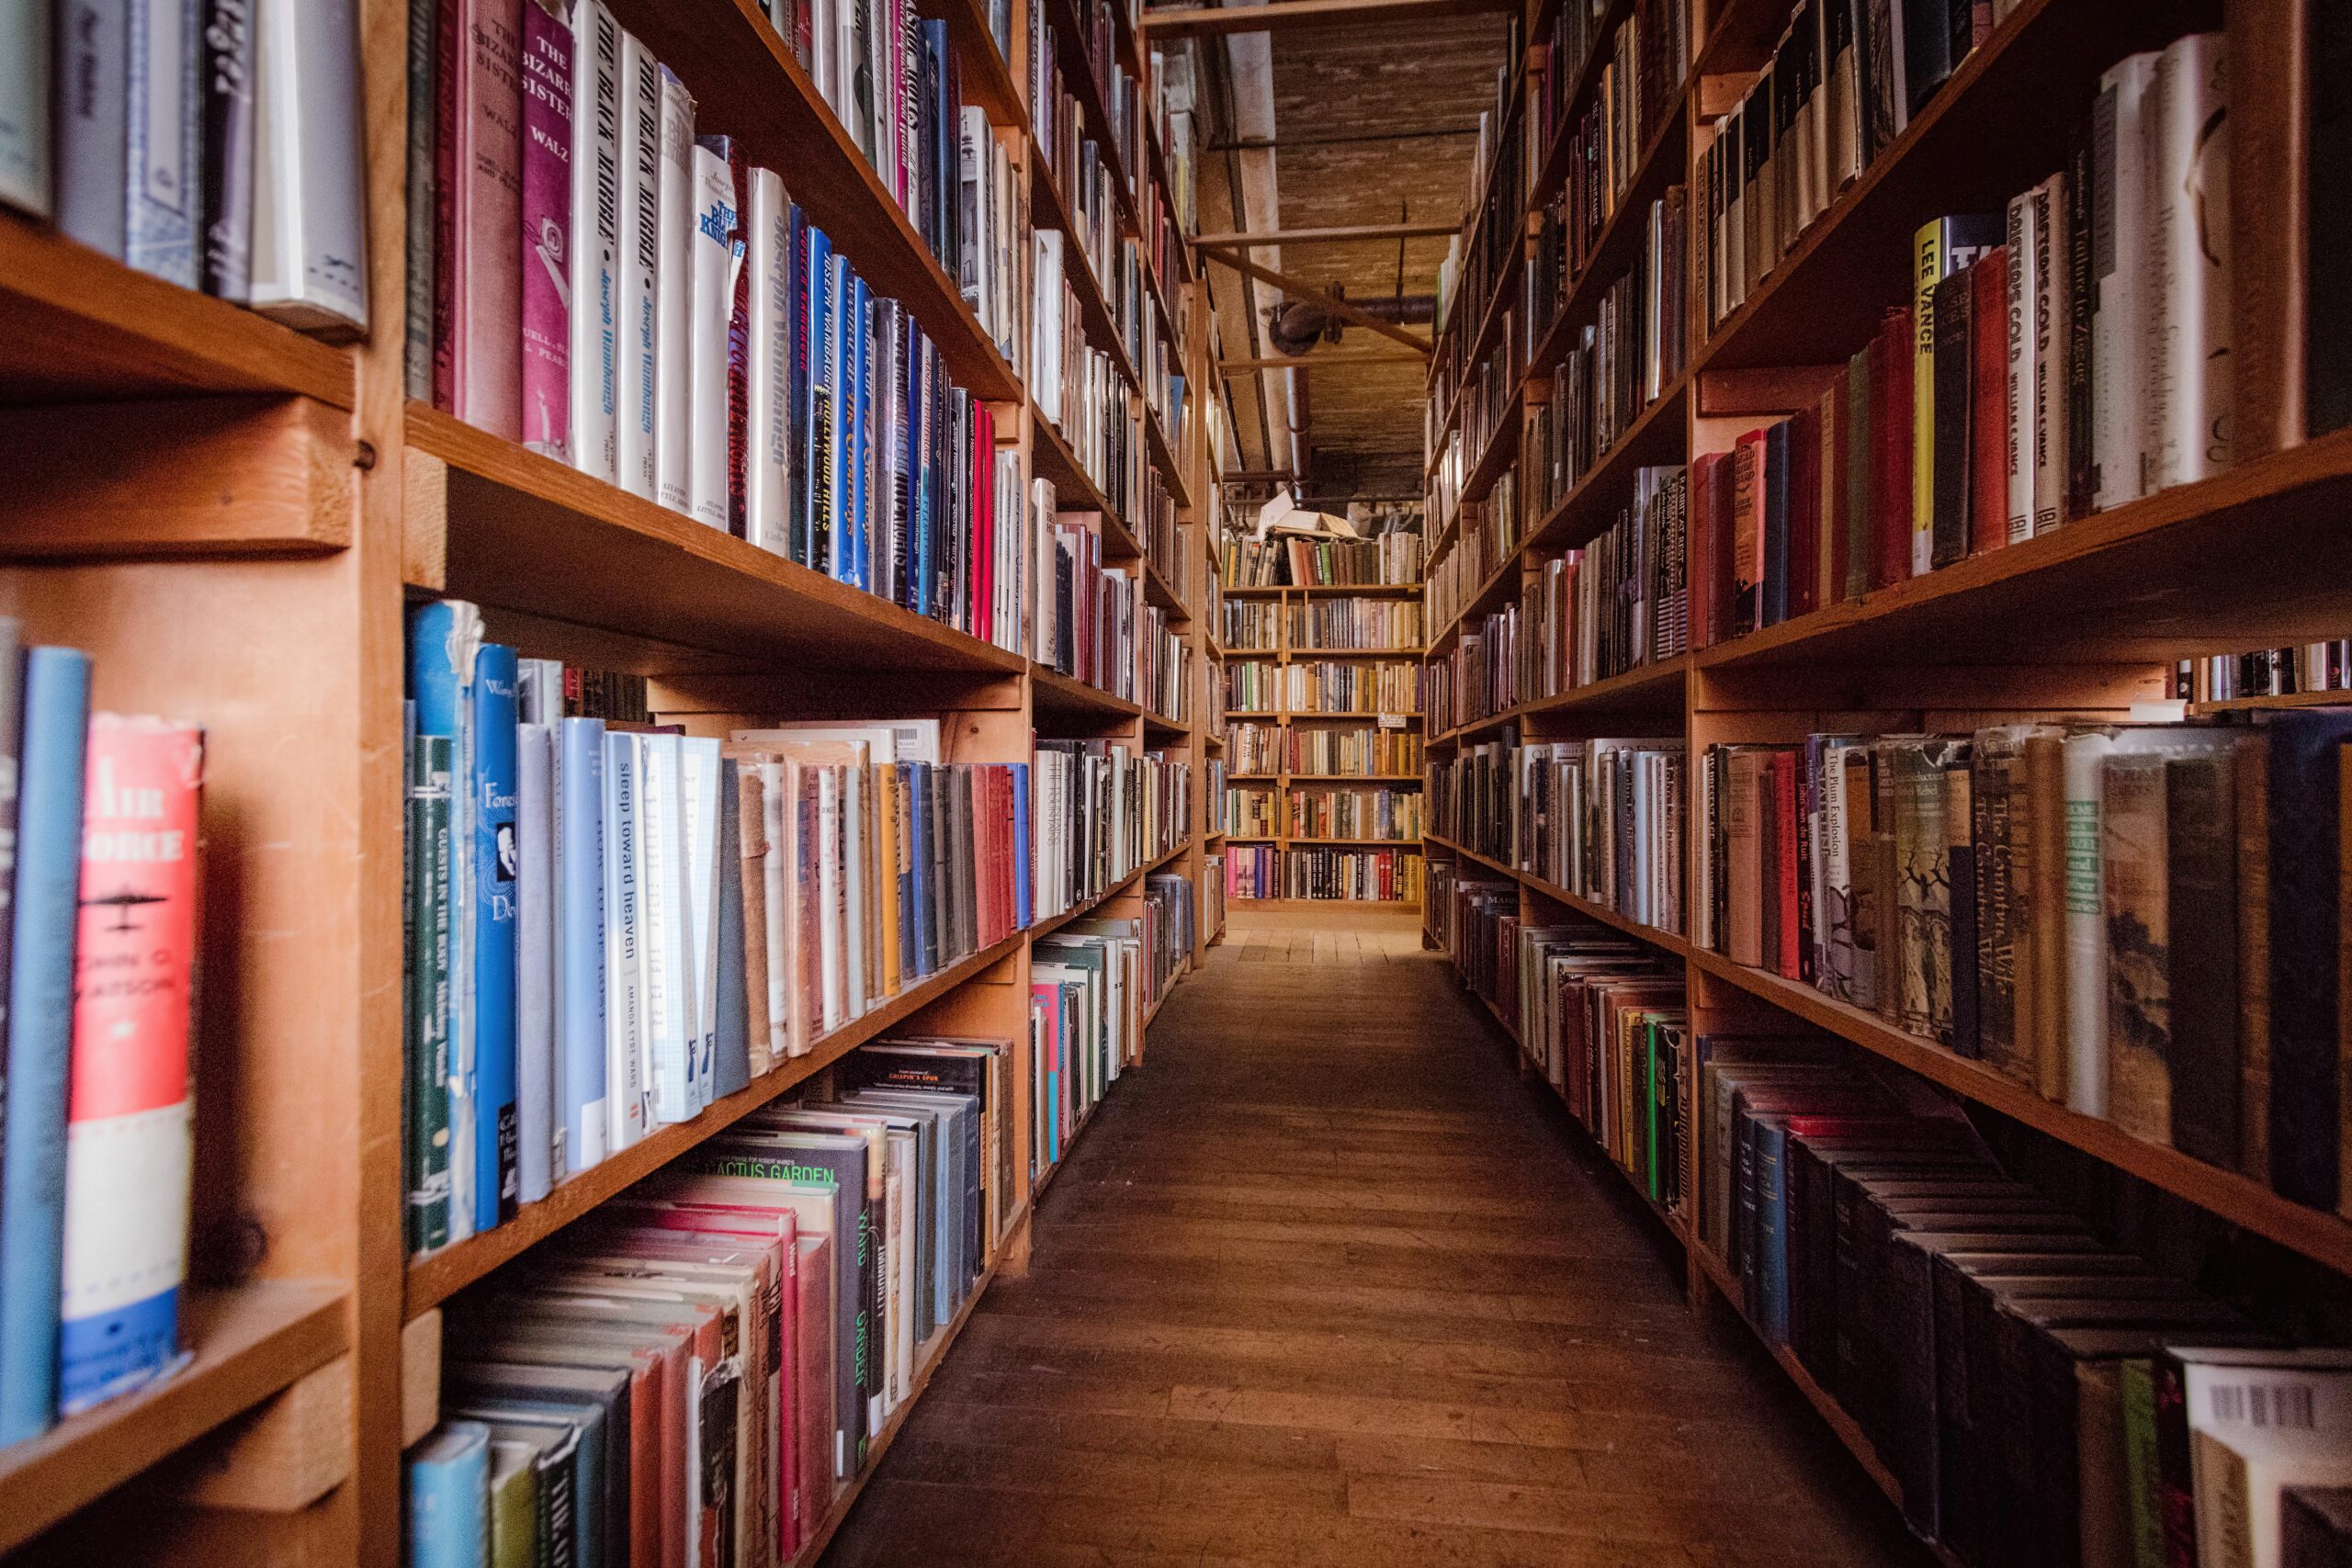 Photo of looking down an aisle of old wooden bookshelves inside a library.